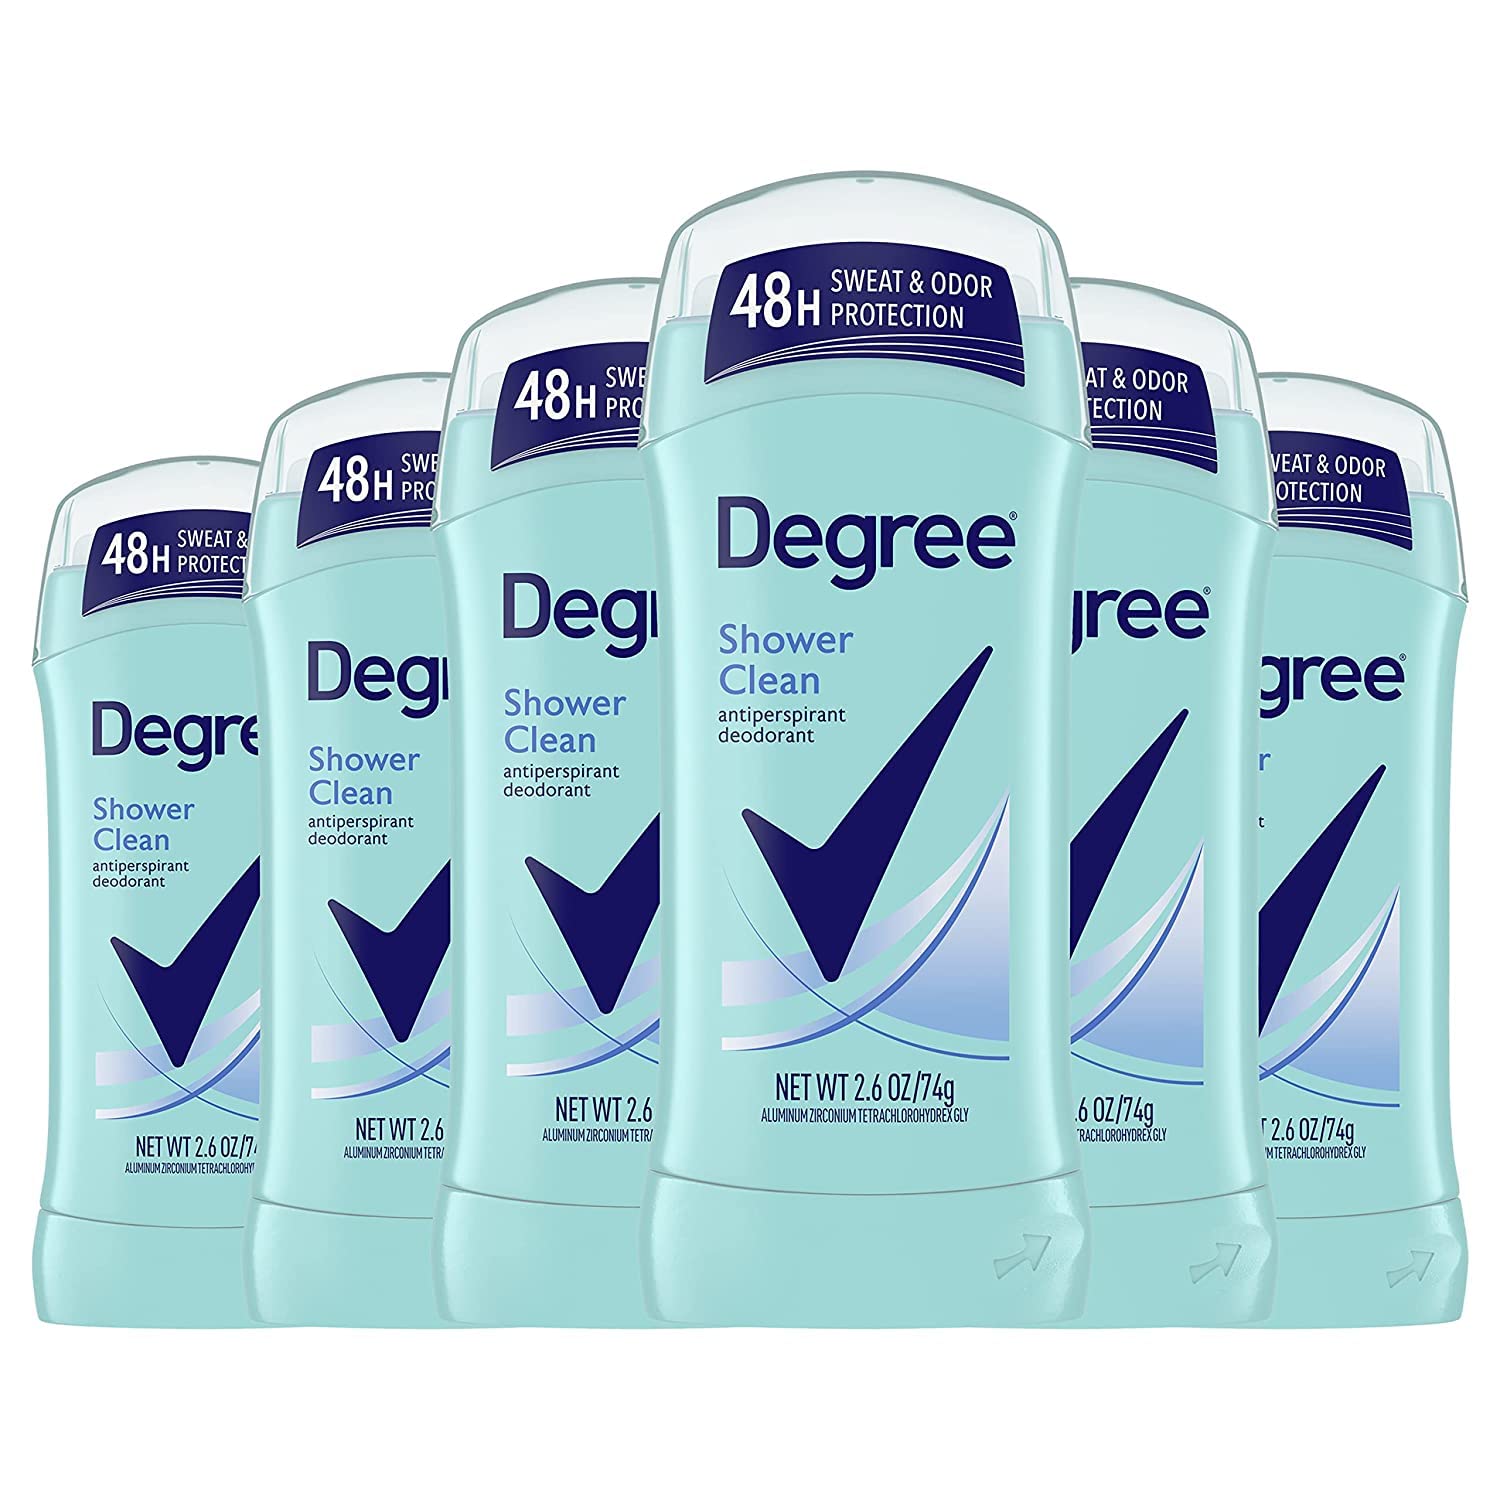 6-Pack 2.6oz Degree 48-Hour Sweat & Odor Protection Antiperspirant Deodorant (Shower Clean) $10.80 w/ S&S + Free Shipping w/ Prime or on $25+